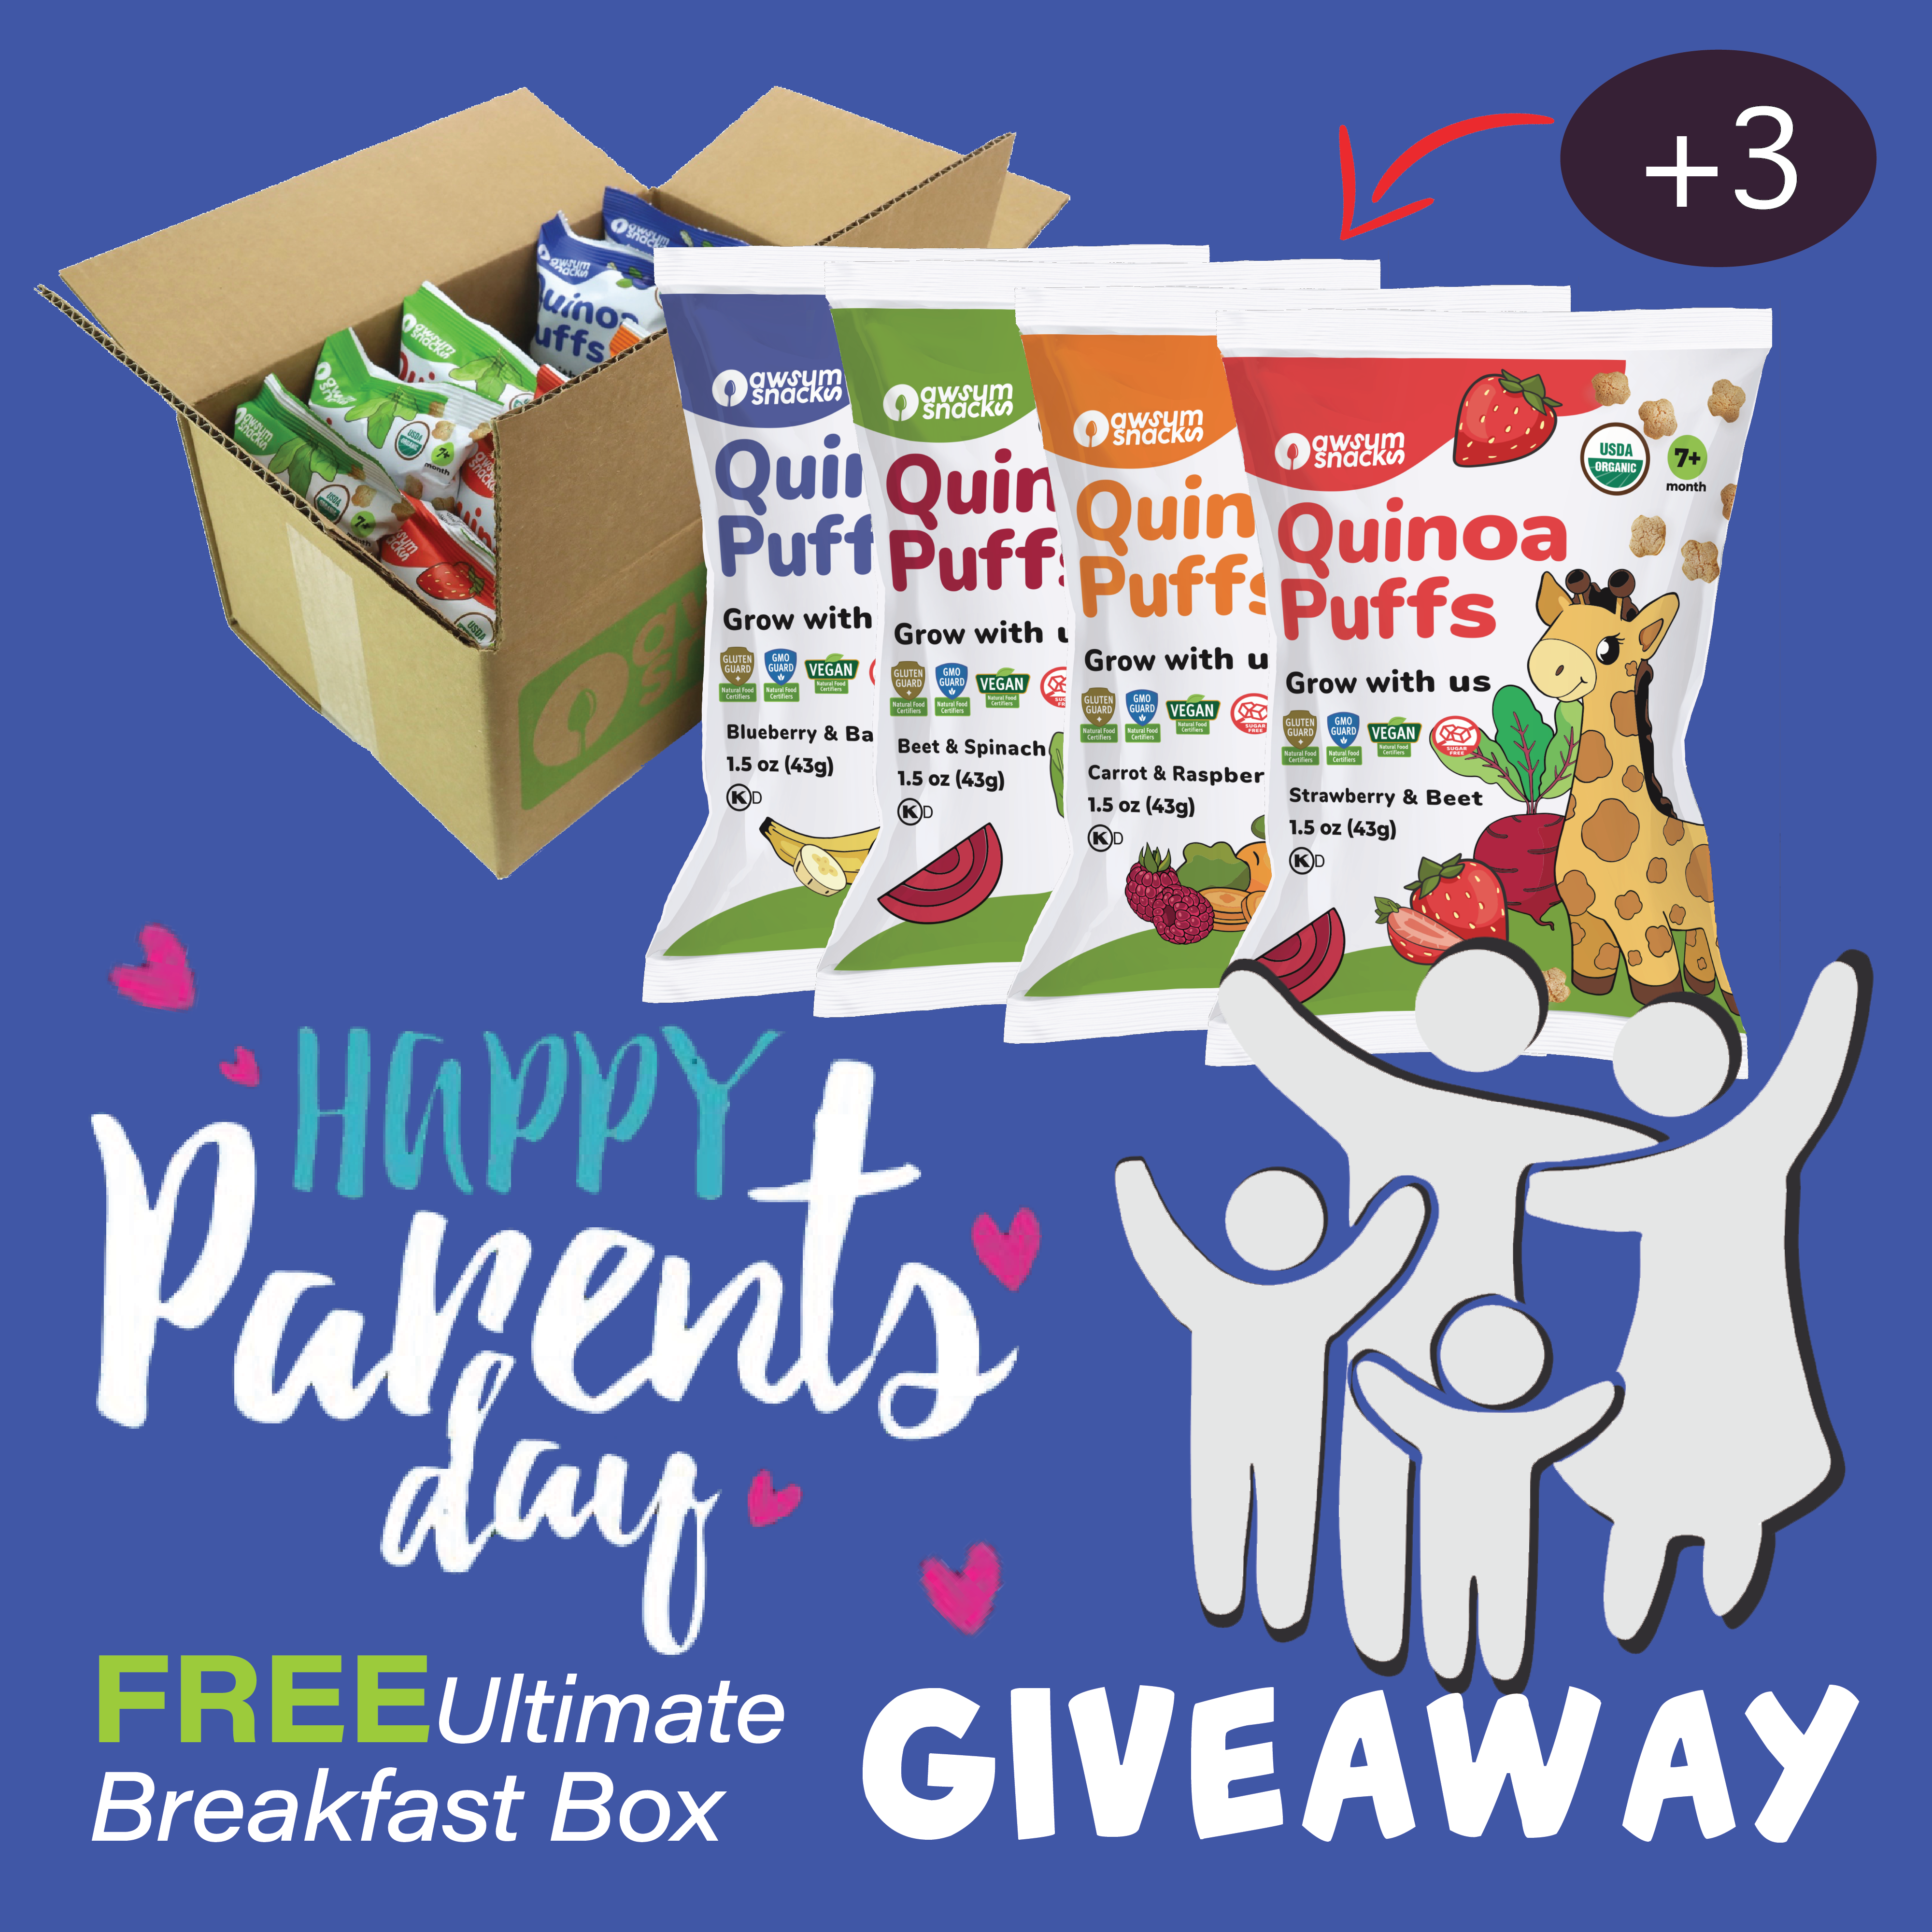 Awsumsnacks is giving away a box with a variety of baby puffs